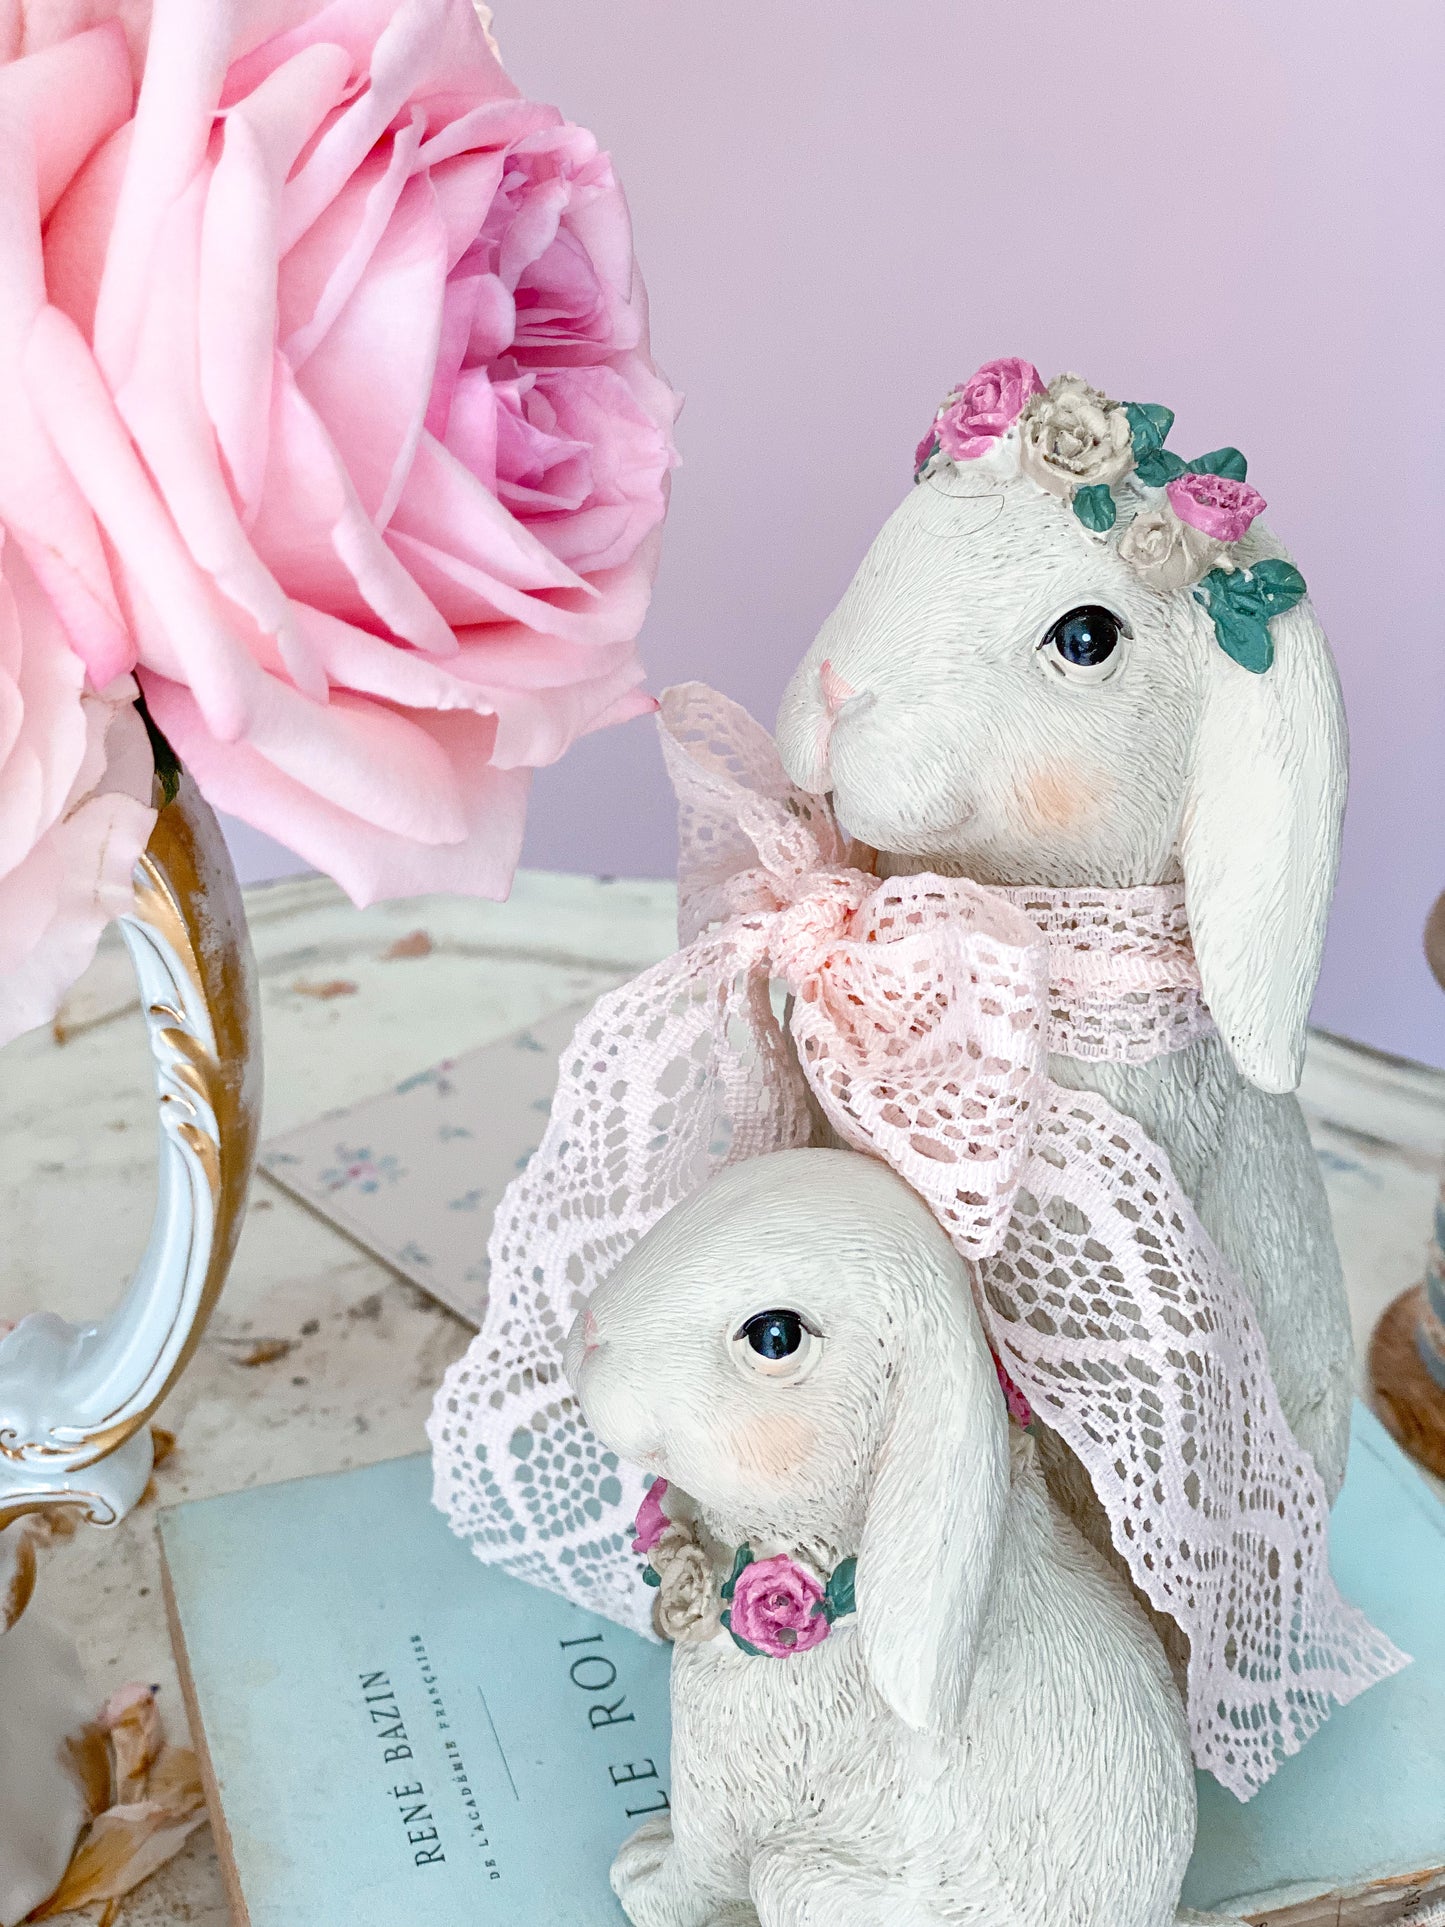 Mama and Baby Bunny with Floral Headbands Figurine